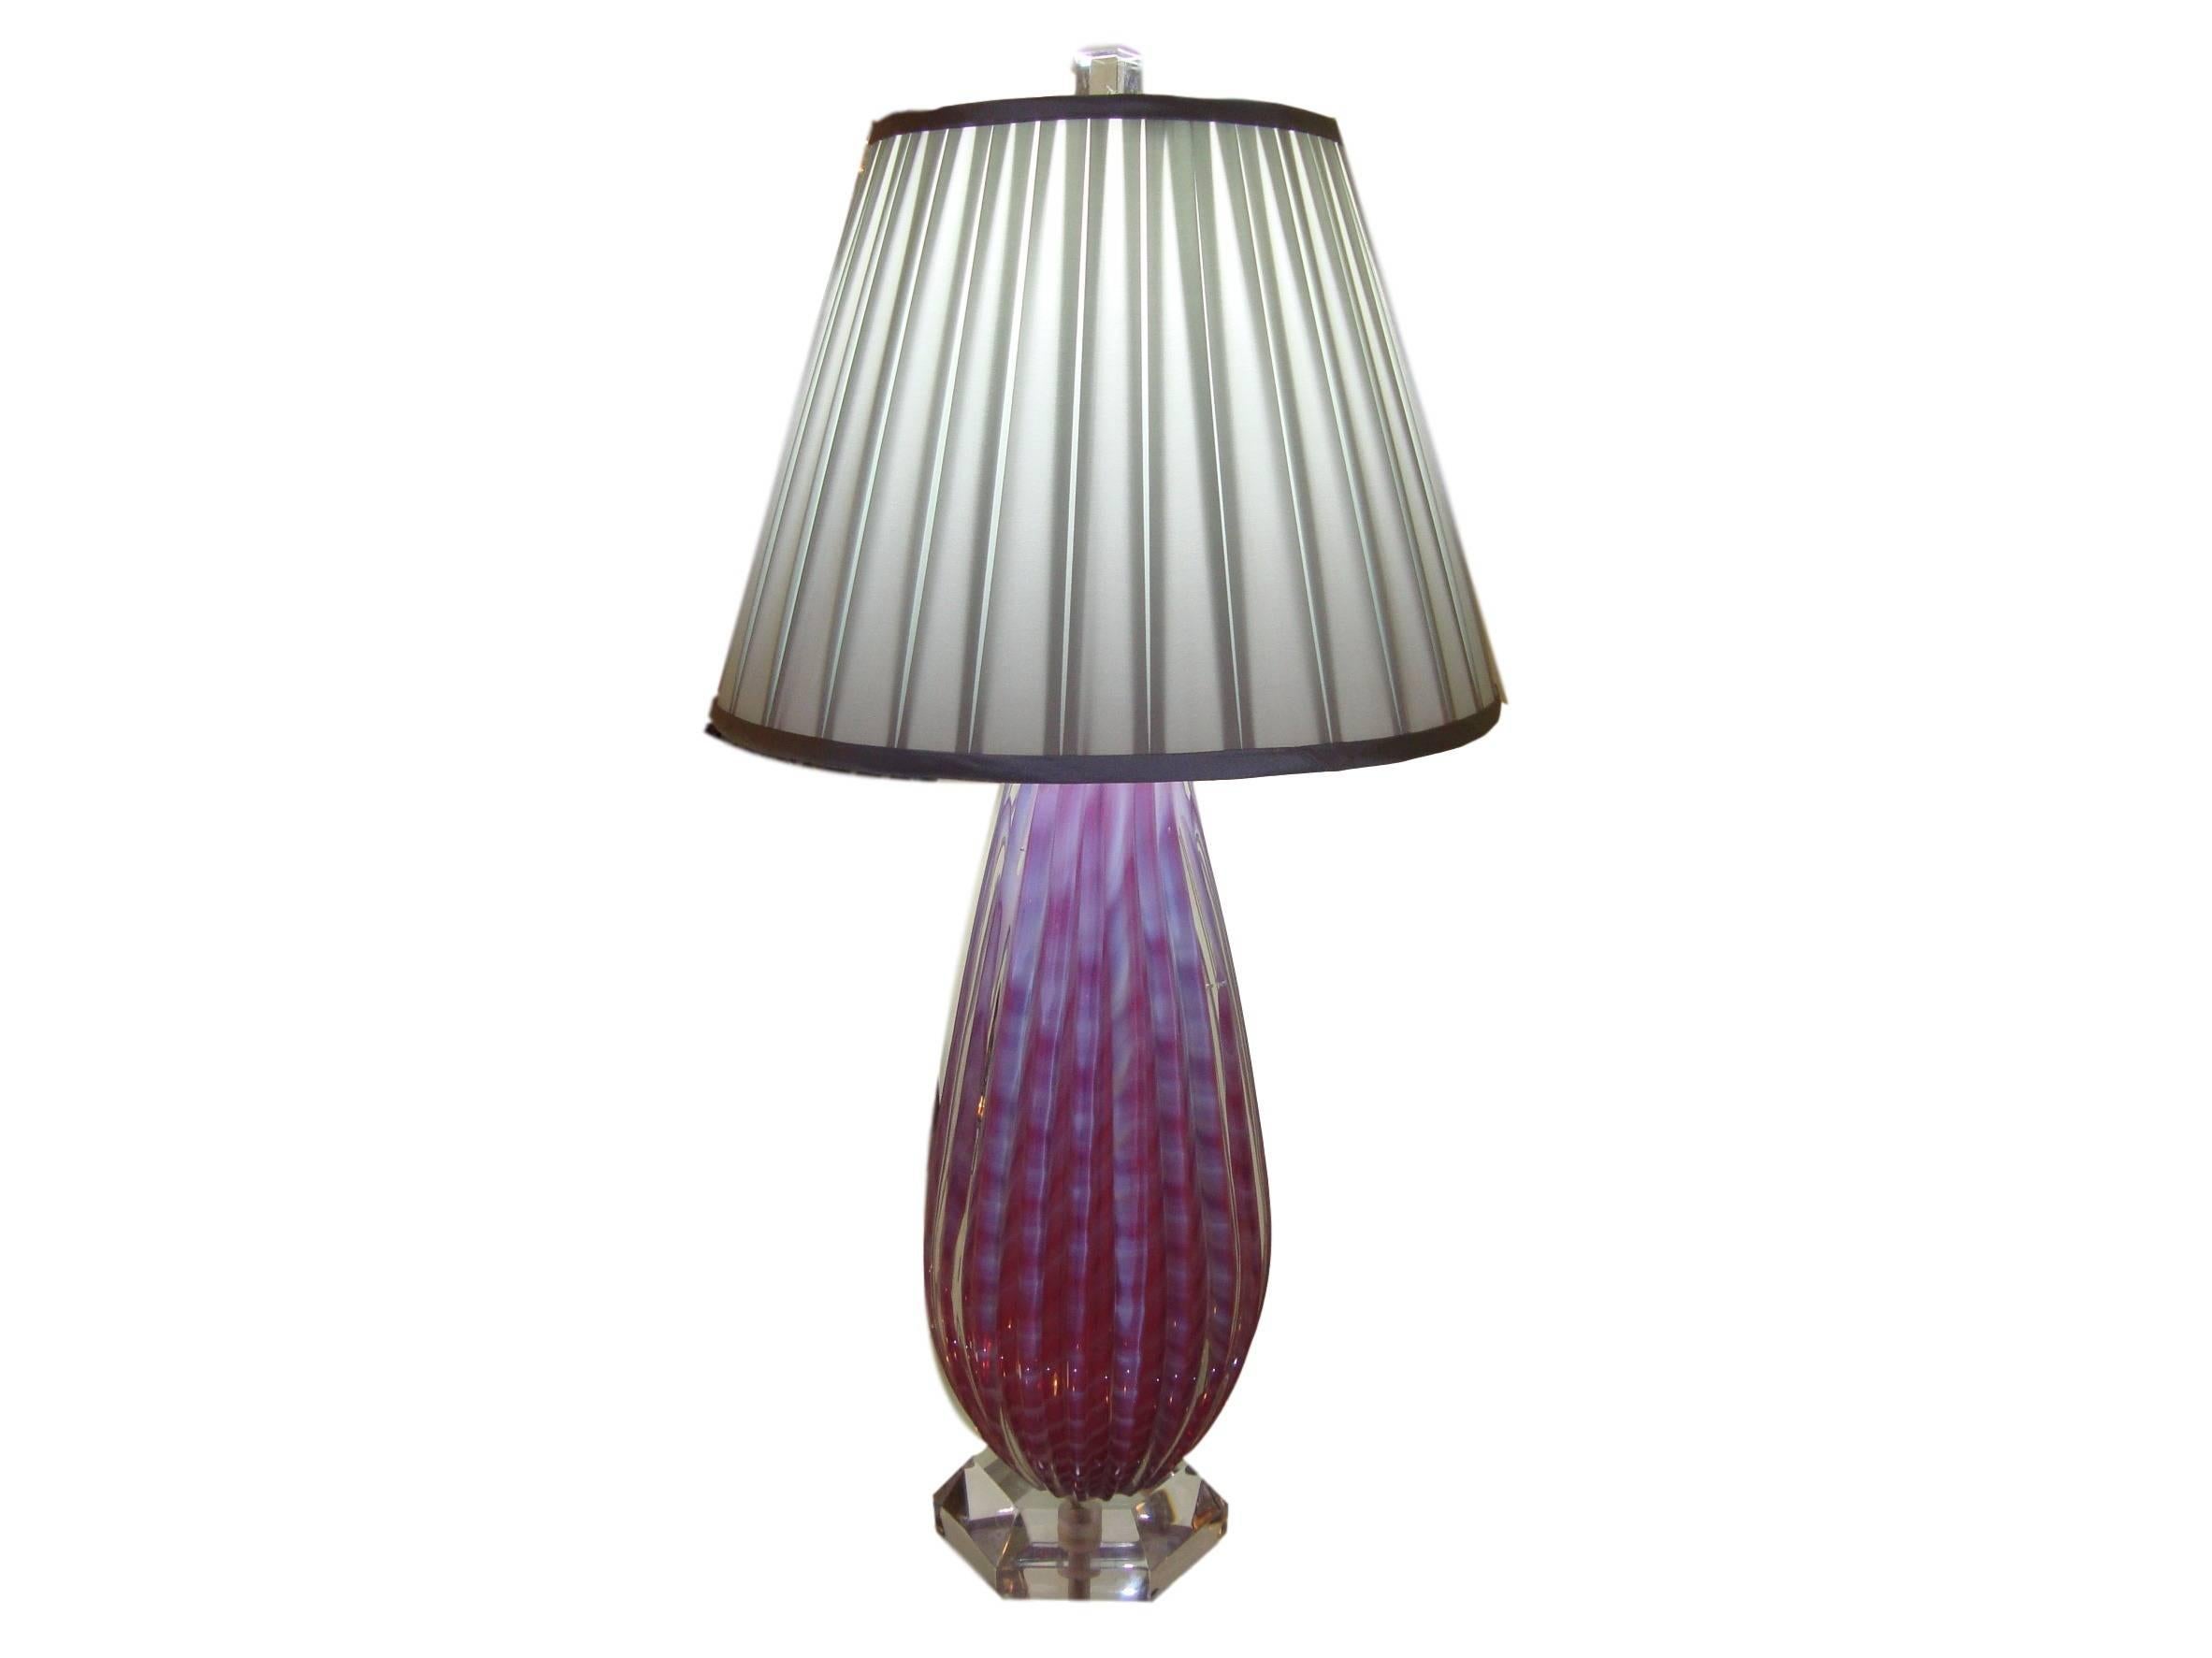 Hollywood Regency Pair of Pink and White Murano Glass Table Lamps